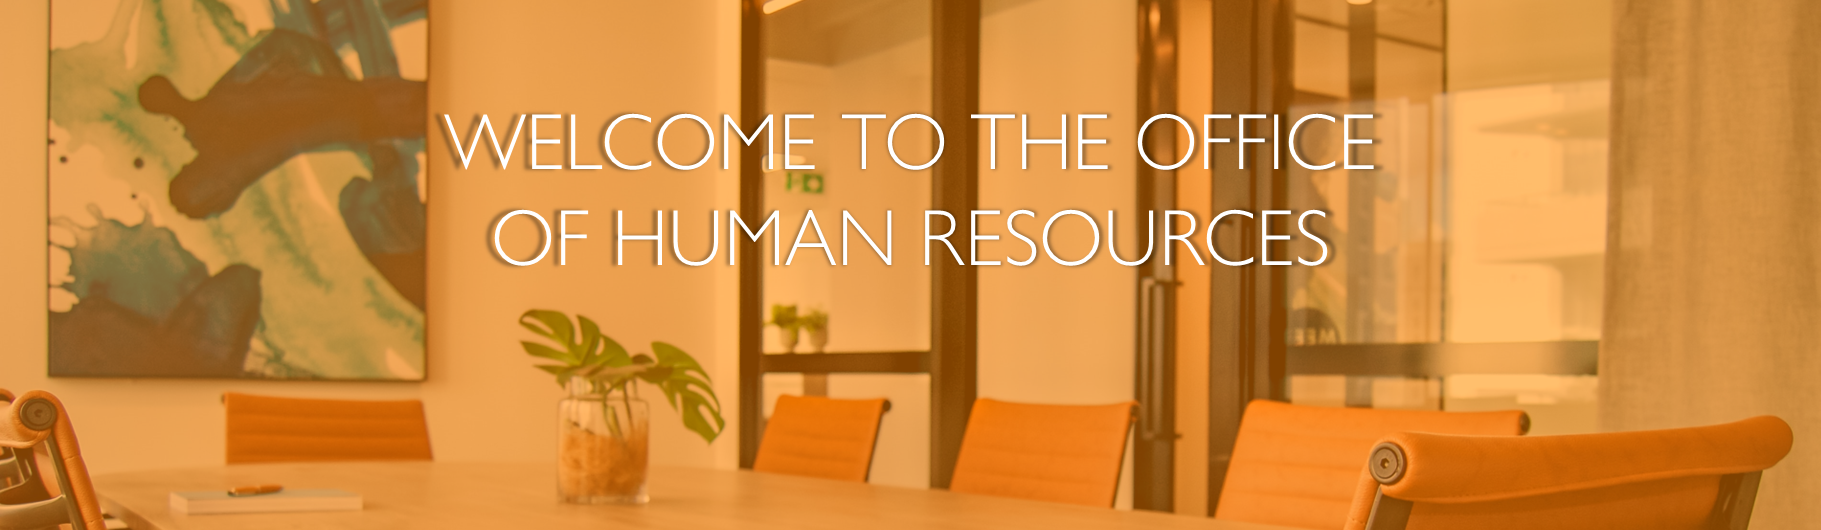 Welcome to UTEP Office of Human Resources 